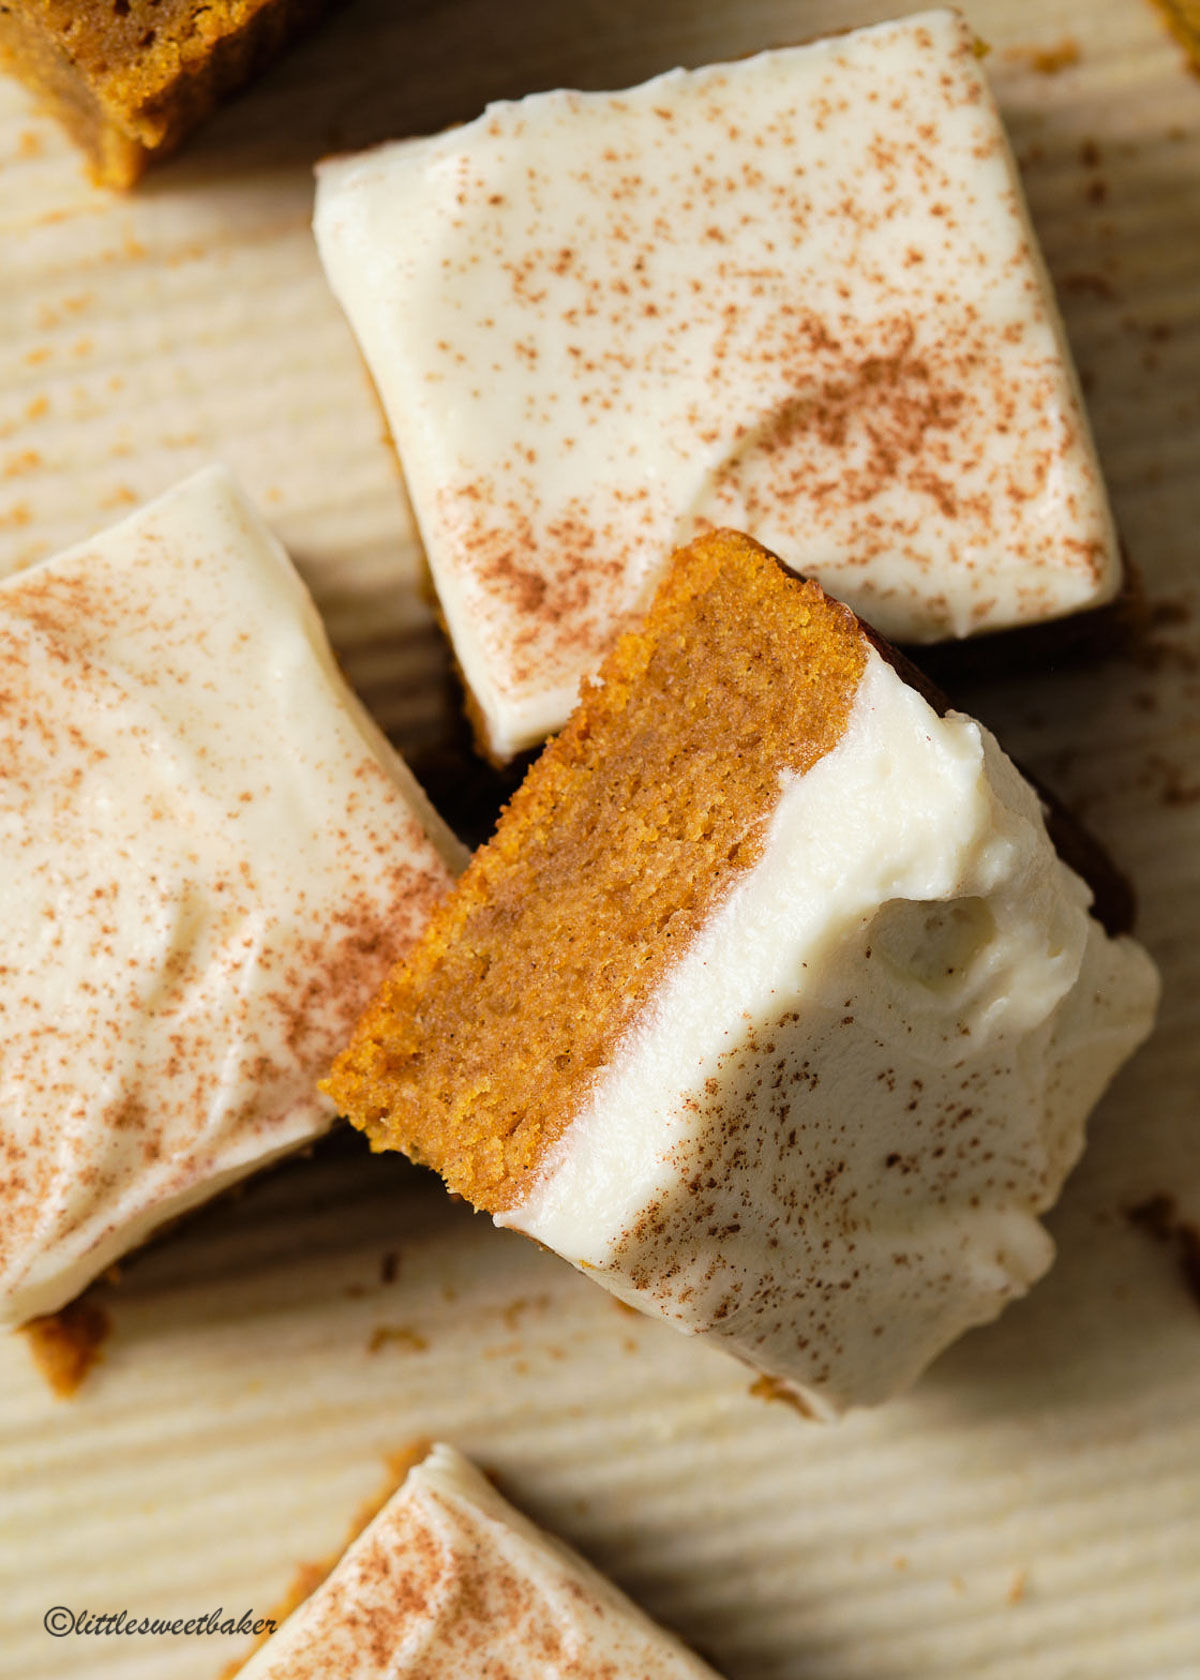 A close up of a pumpkin bar with cream cheese frosting and light dusting of cinnamon.